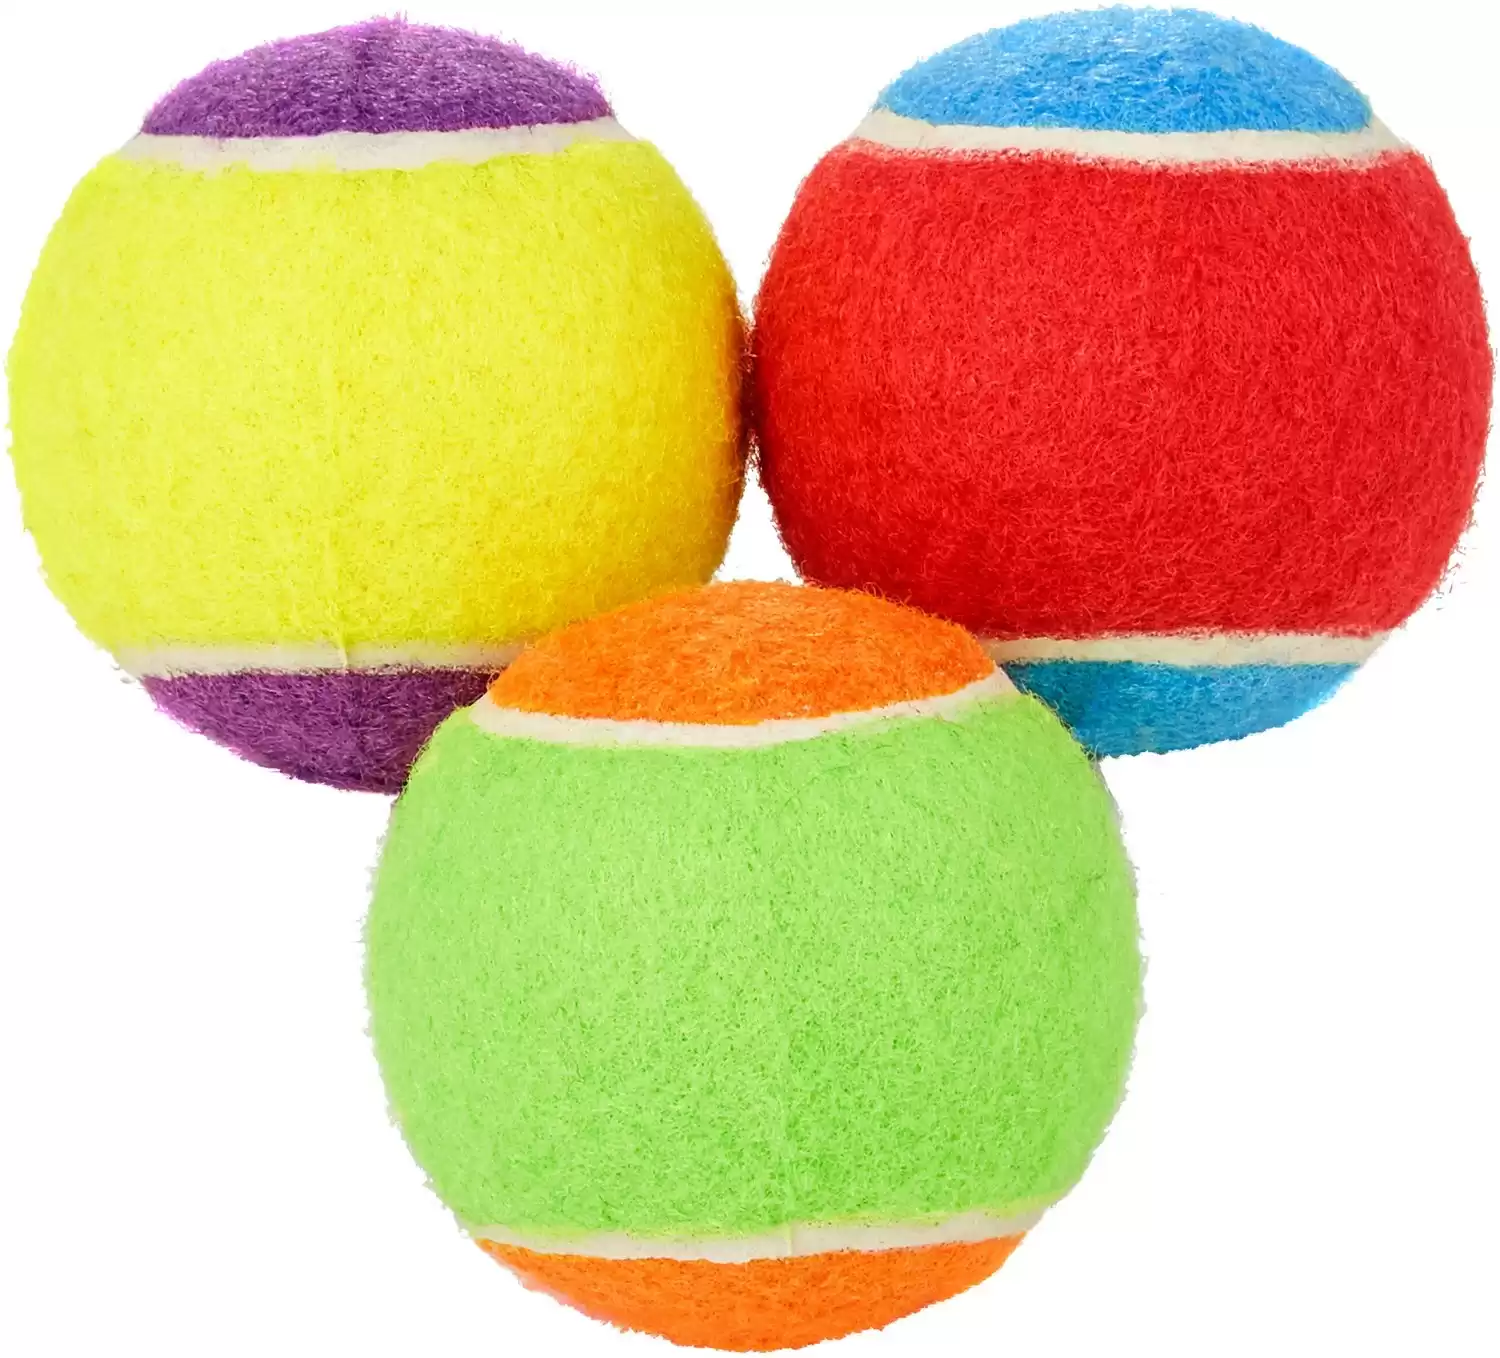 Frisco Fetch Squeaking Colorful Tennis Ball Toy